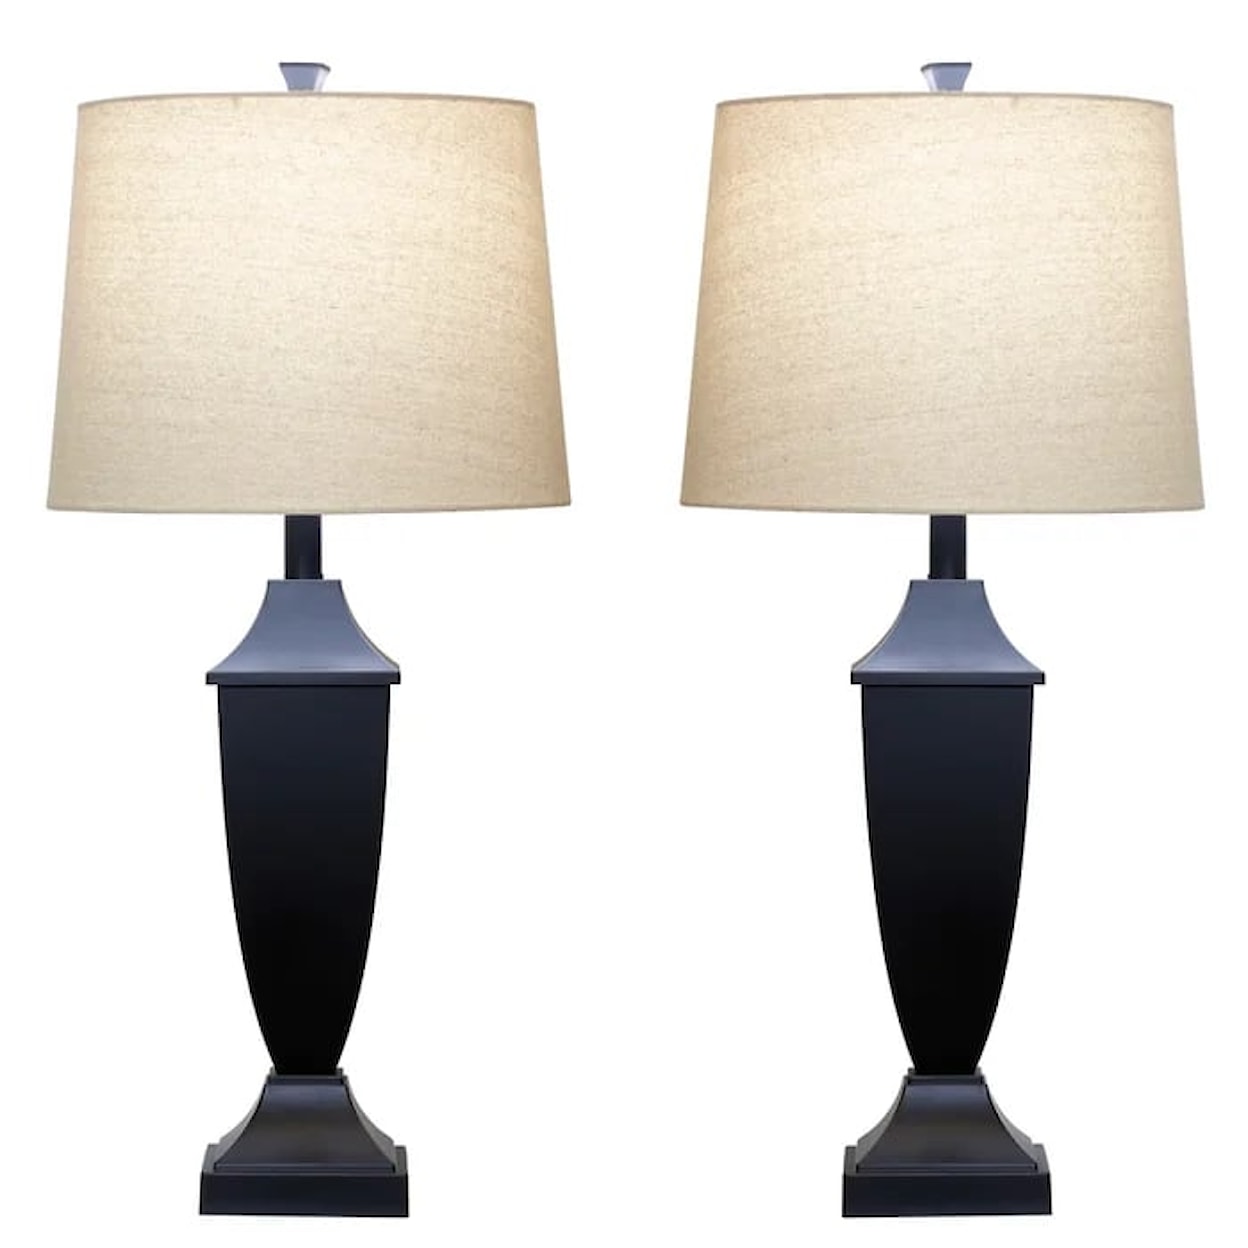 StyleCraft Lamps Pair of Classic Table Lamps